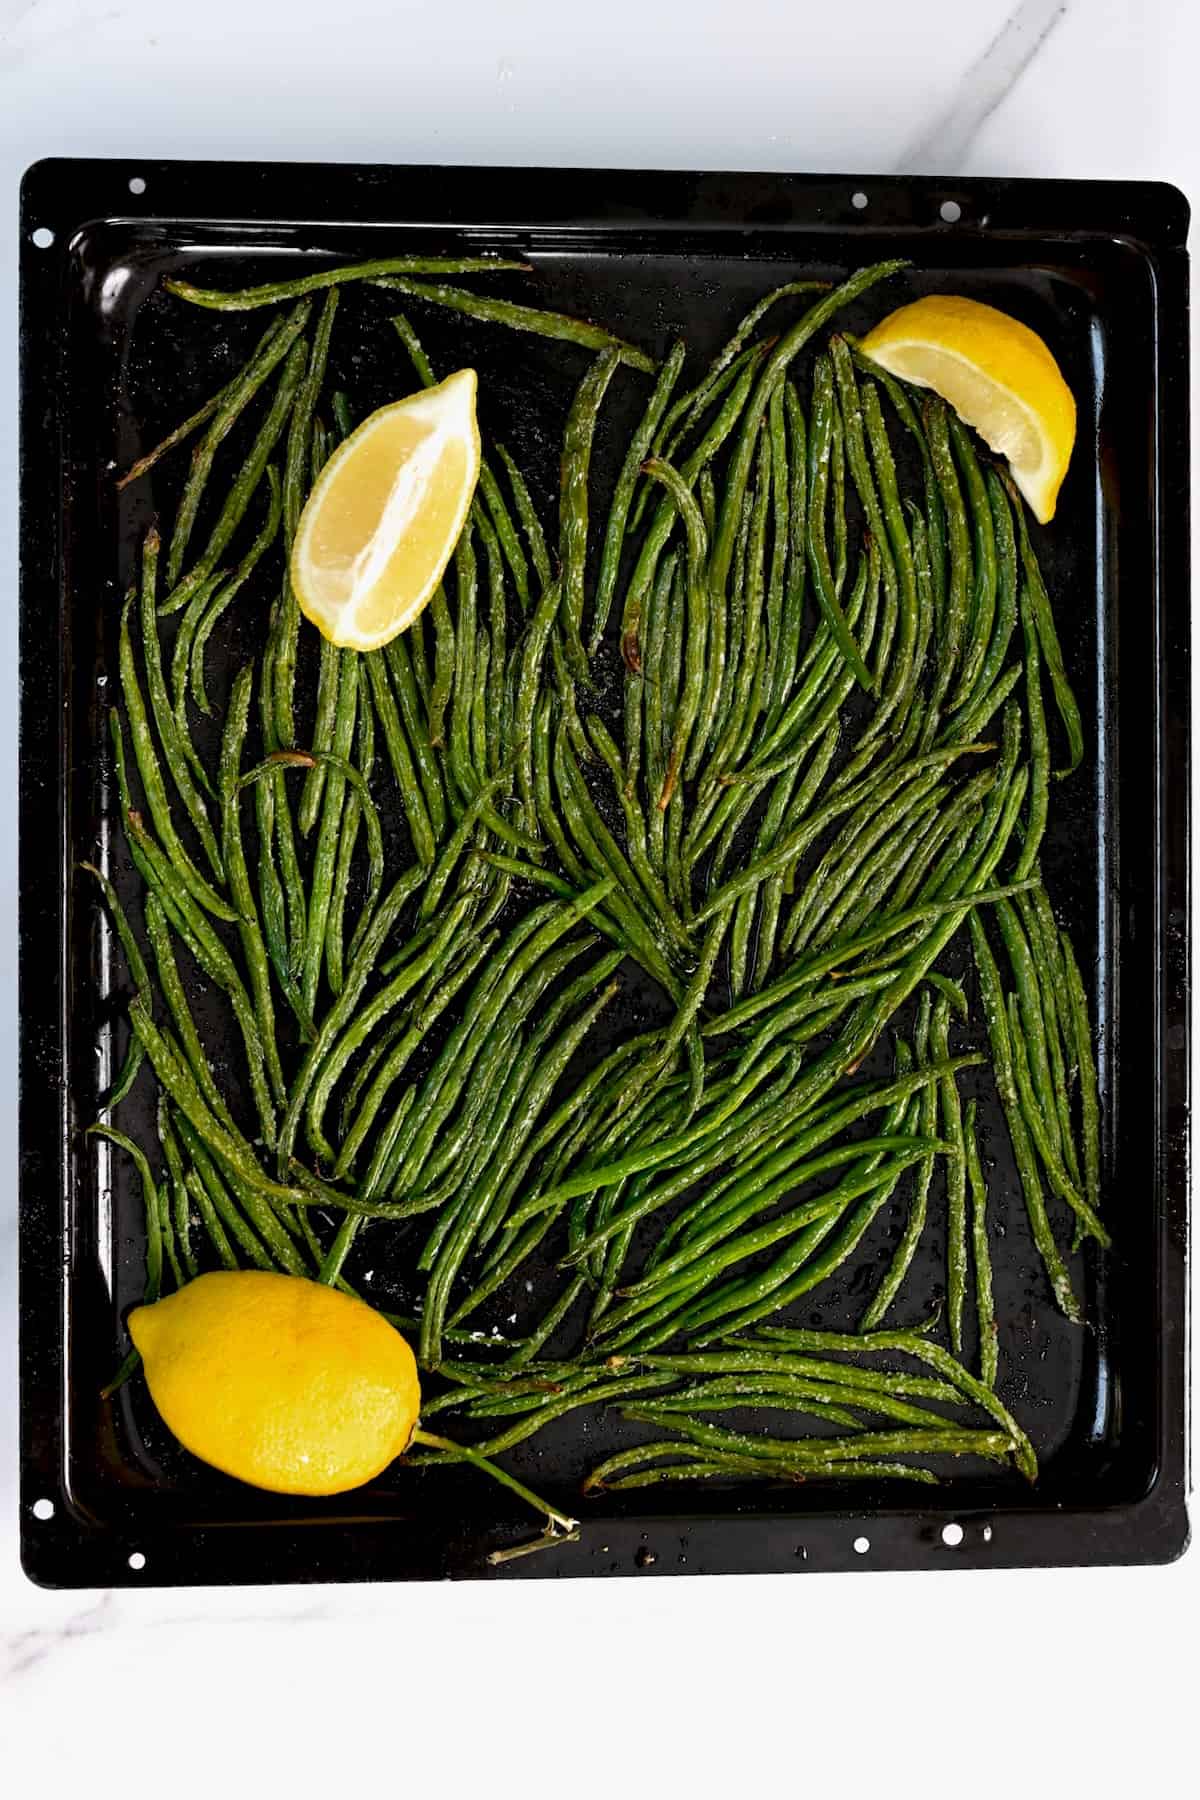 Roasted green beans in a baking tray fresh out of the oven